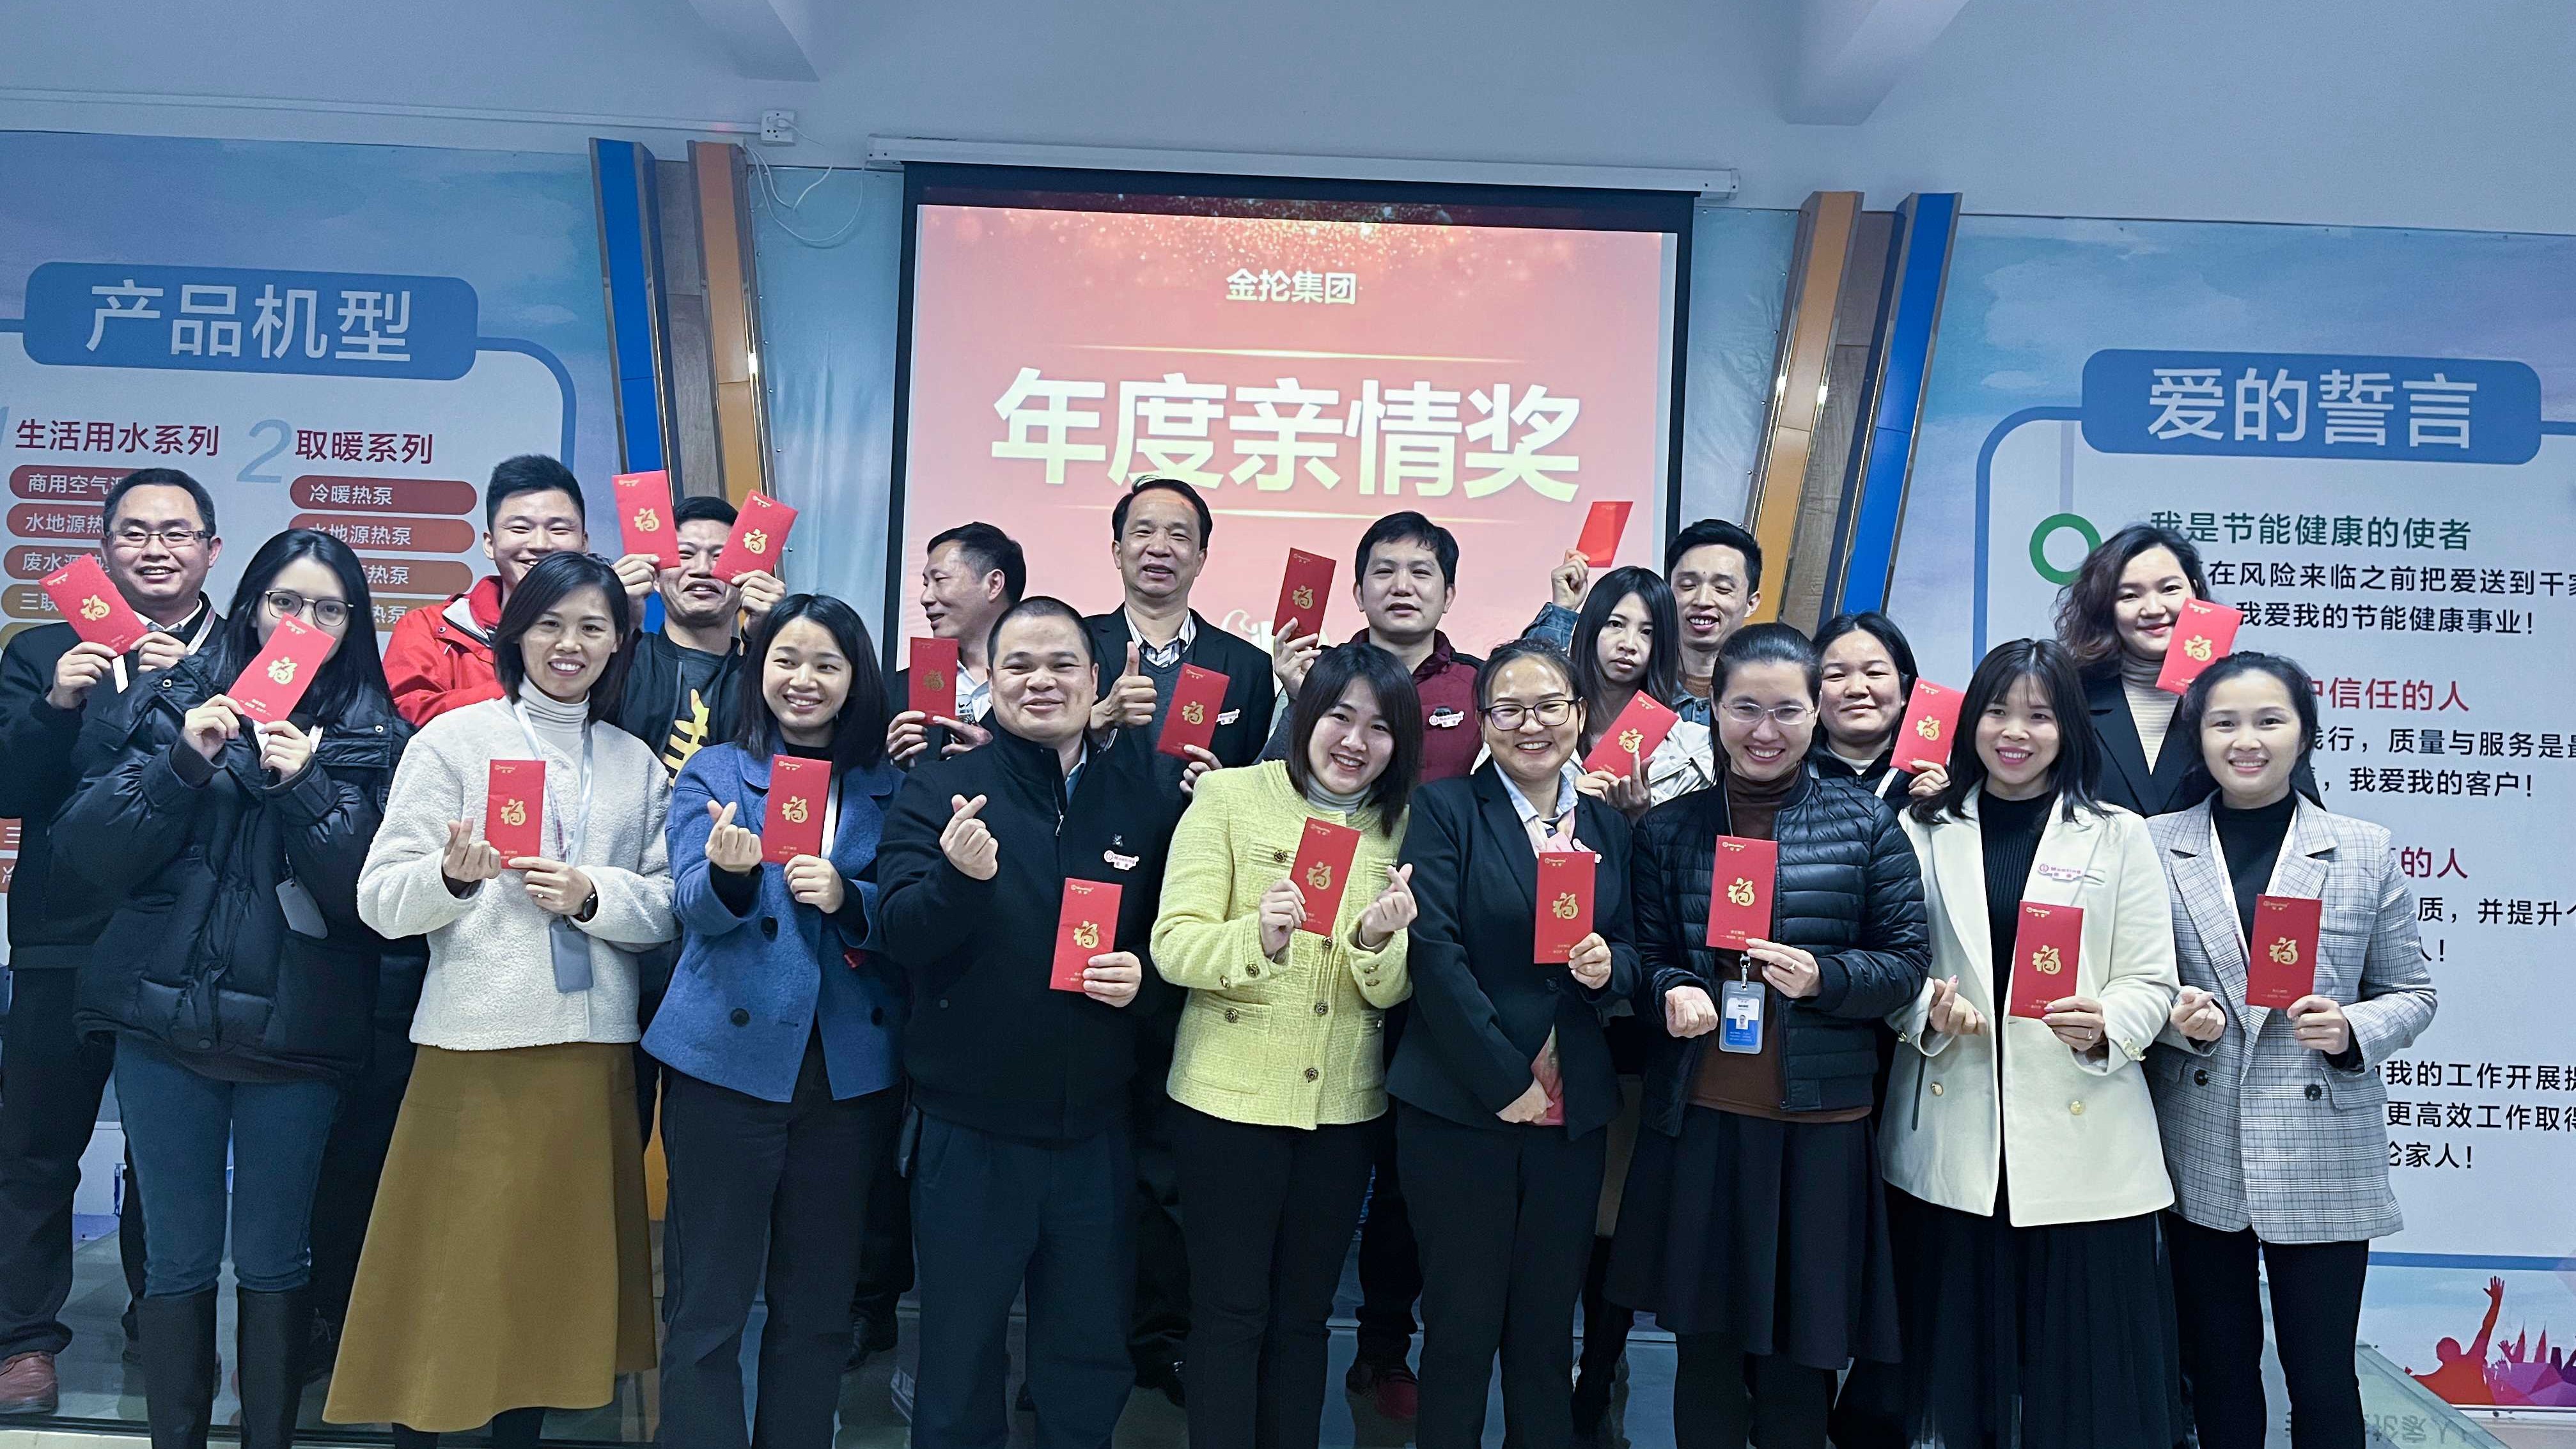 The year-end summary and commendation meeting of Jinlun group was successfully concluded